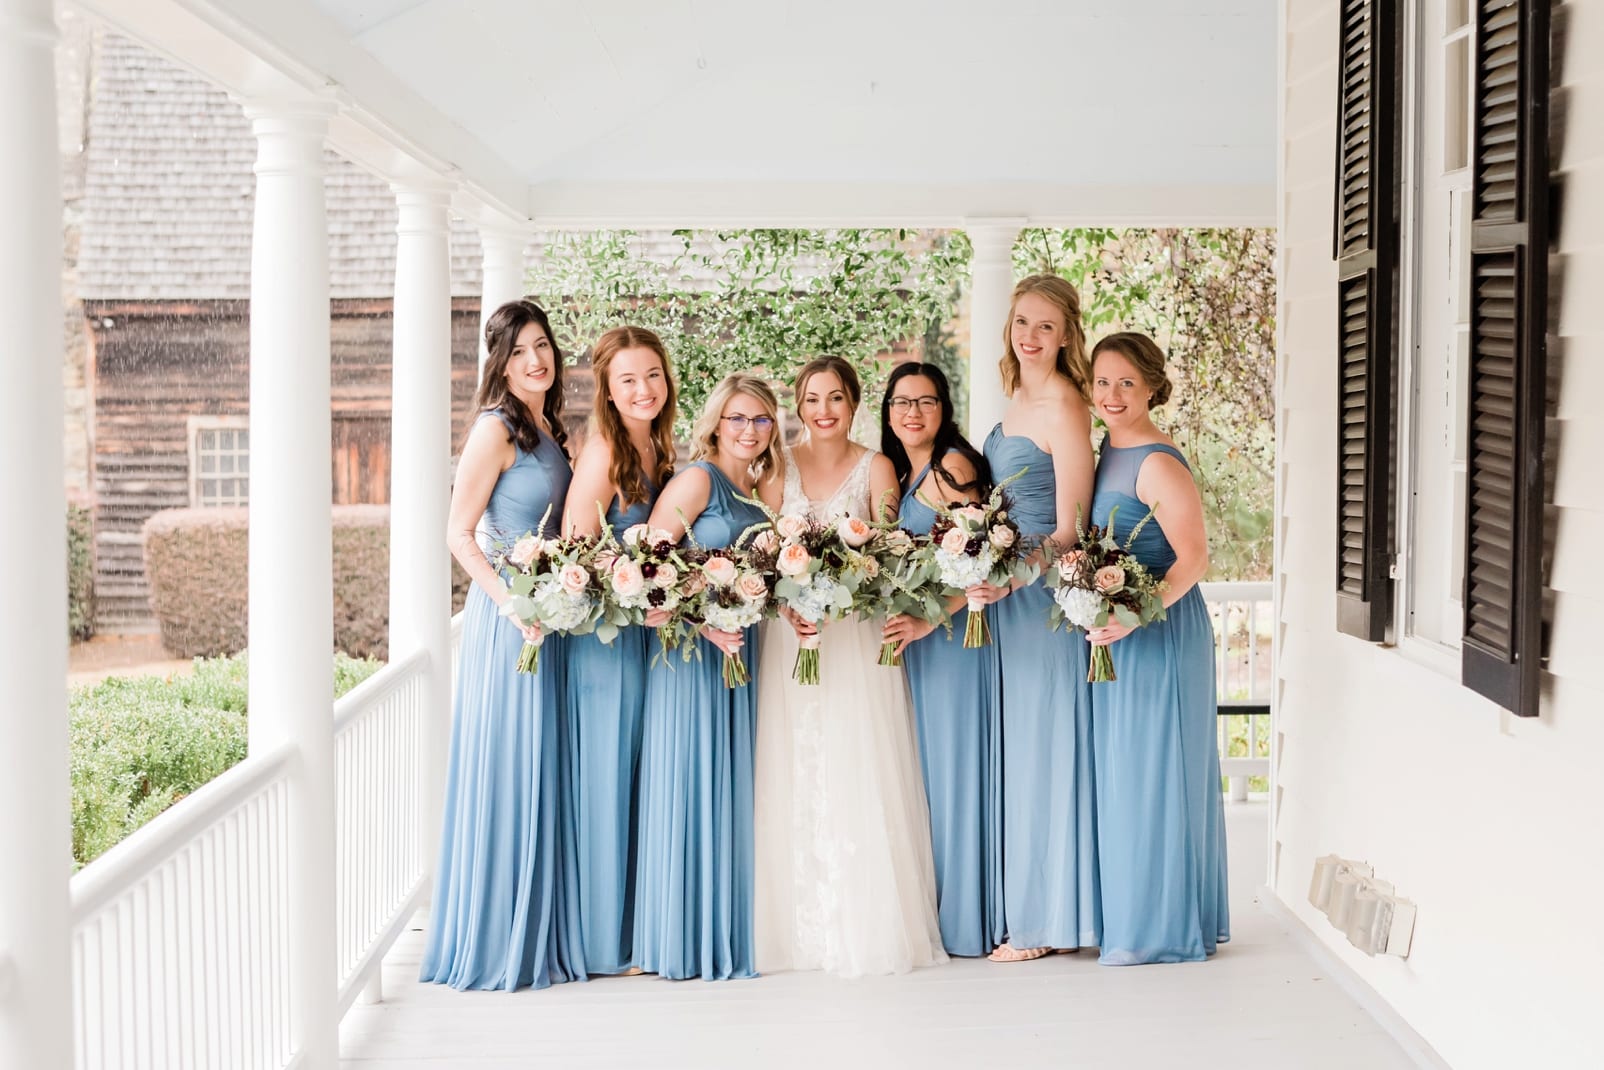 Sutherland Estate bride and bridesmaids standing together on the front porch of the estate photo